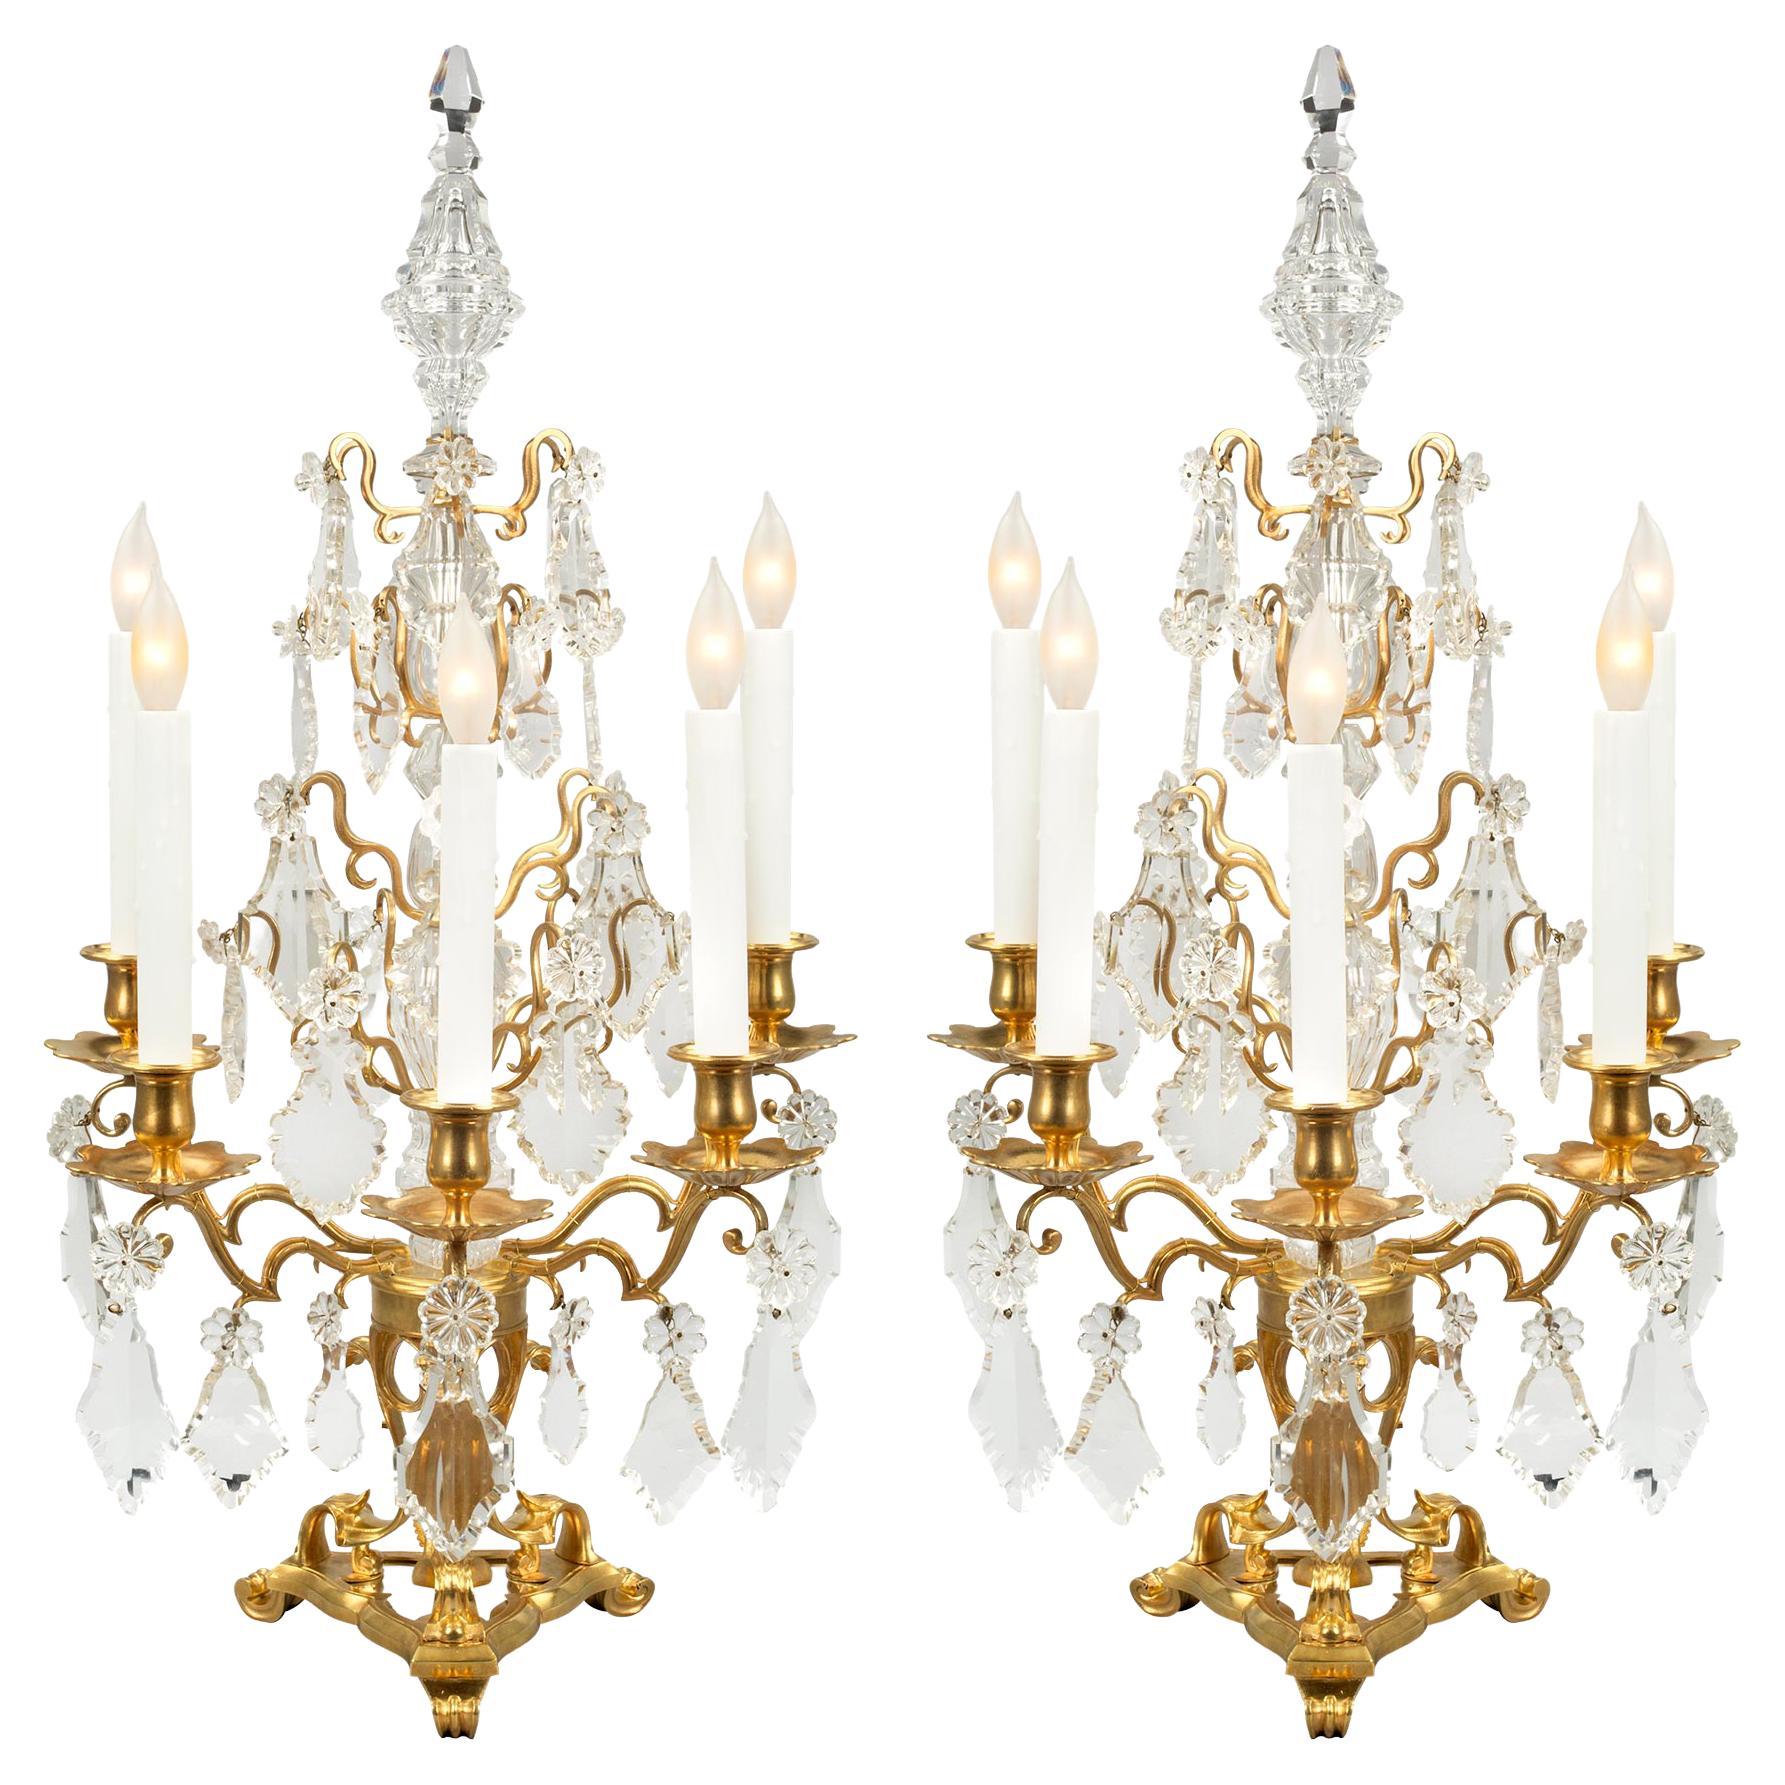 Pair of French 19th Century Louis XV Style Ormolu and Baccarat Girandoles